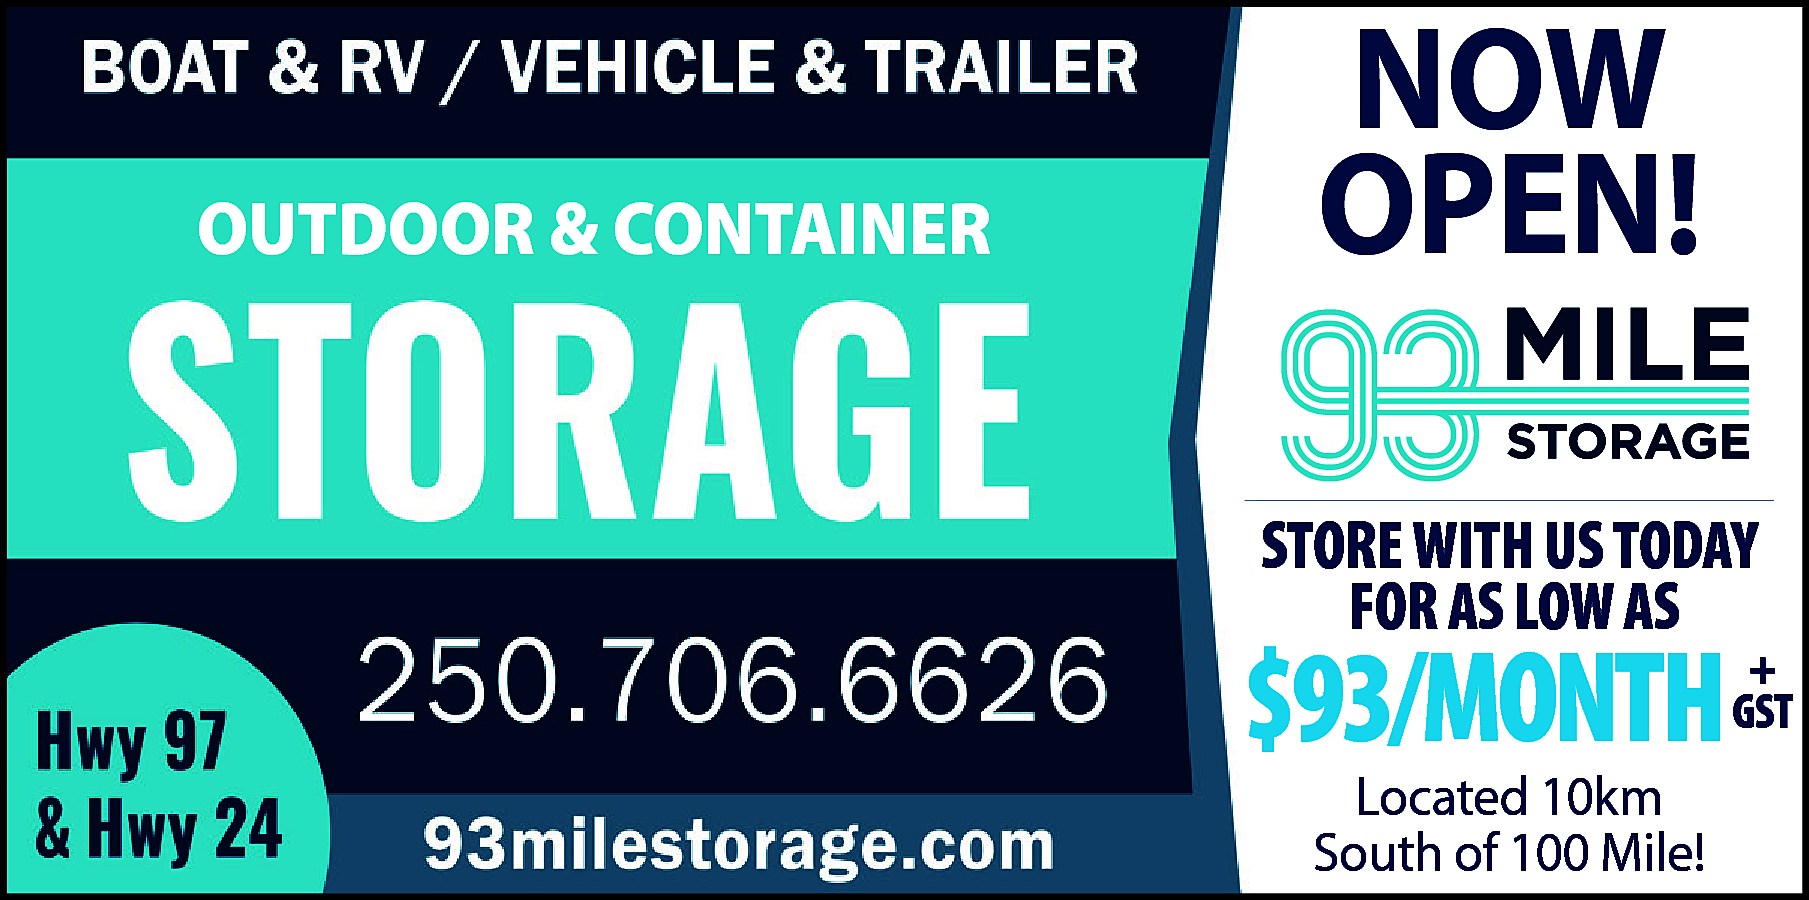 OUTDOOR <br>CONTAINER <br>Boat & RV  OUTDOOR  CONTAINER  Boat & RV &  Vehicle  & Trailer  STORAGE  250.706.6626  93milestorage.com  Hwy 97 & Hwy 24    NOW  OPEN!  93 Mile Storage    STORE WITH US TODAY  FOR AS LOW AS    $93/MONTH  Located 10km  South of 100 Mile!    +  GST    